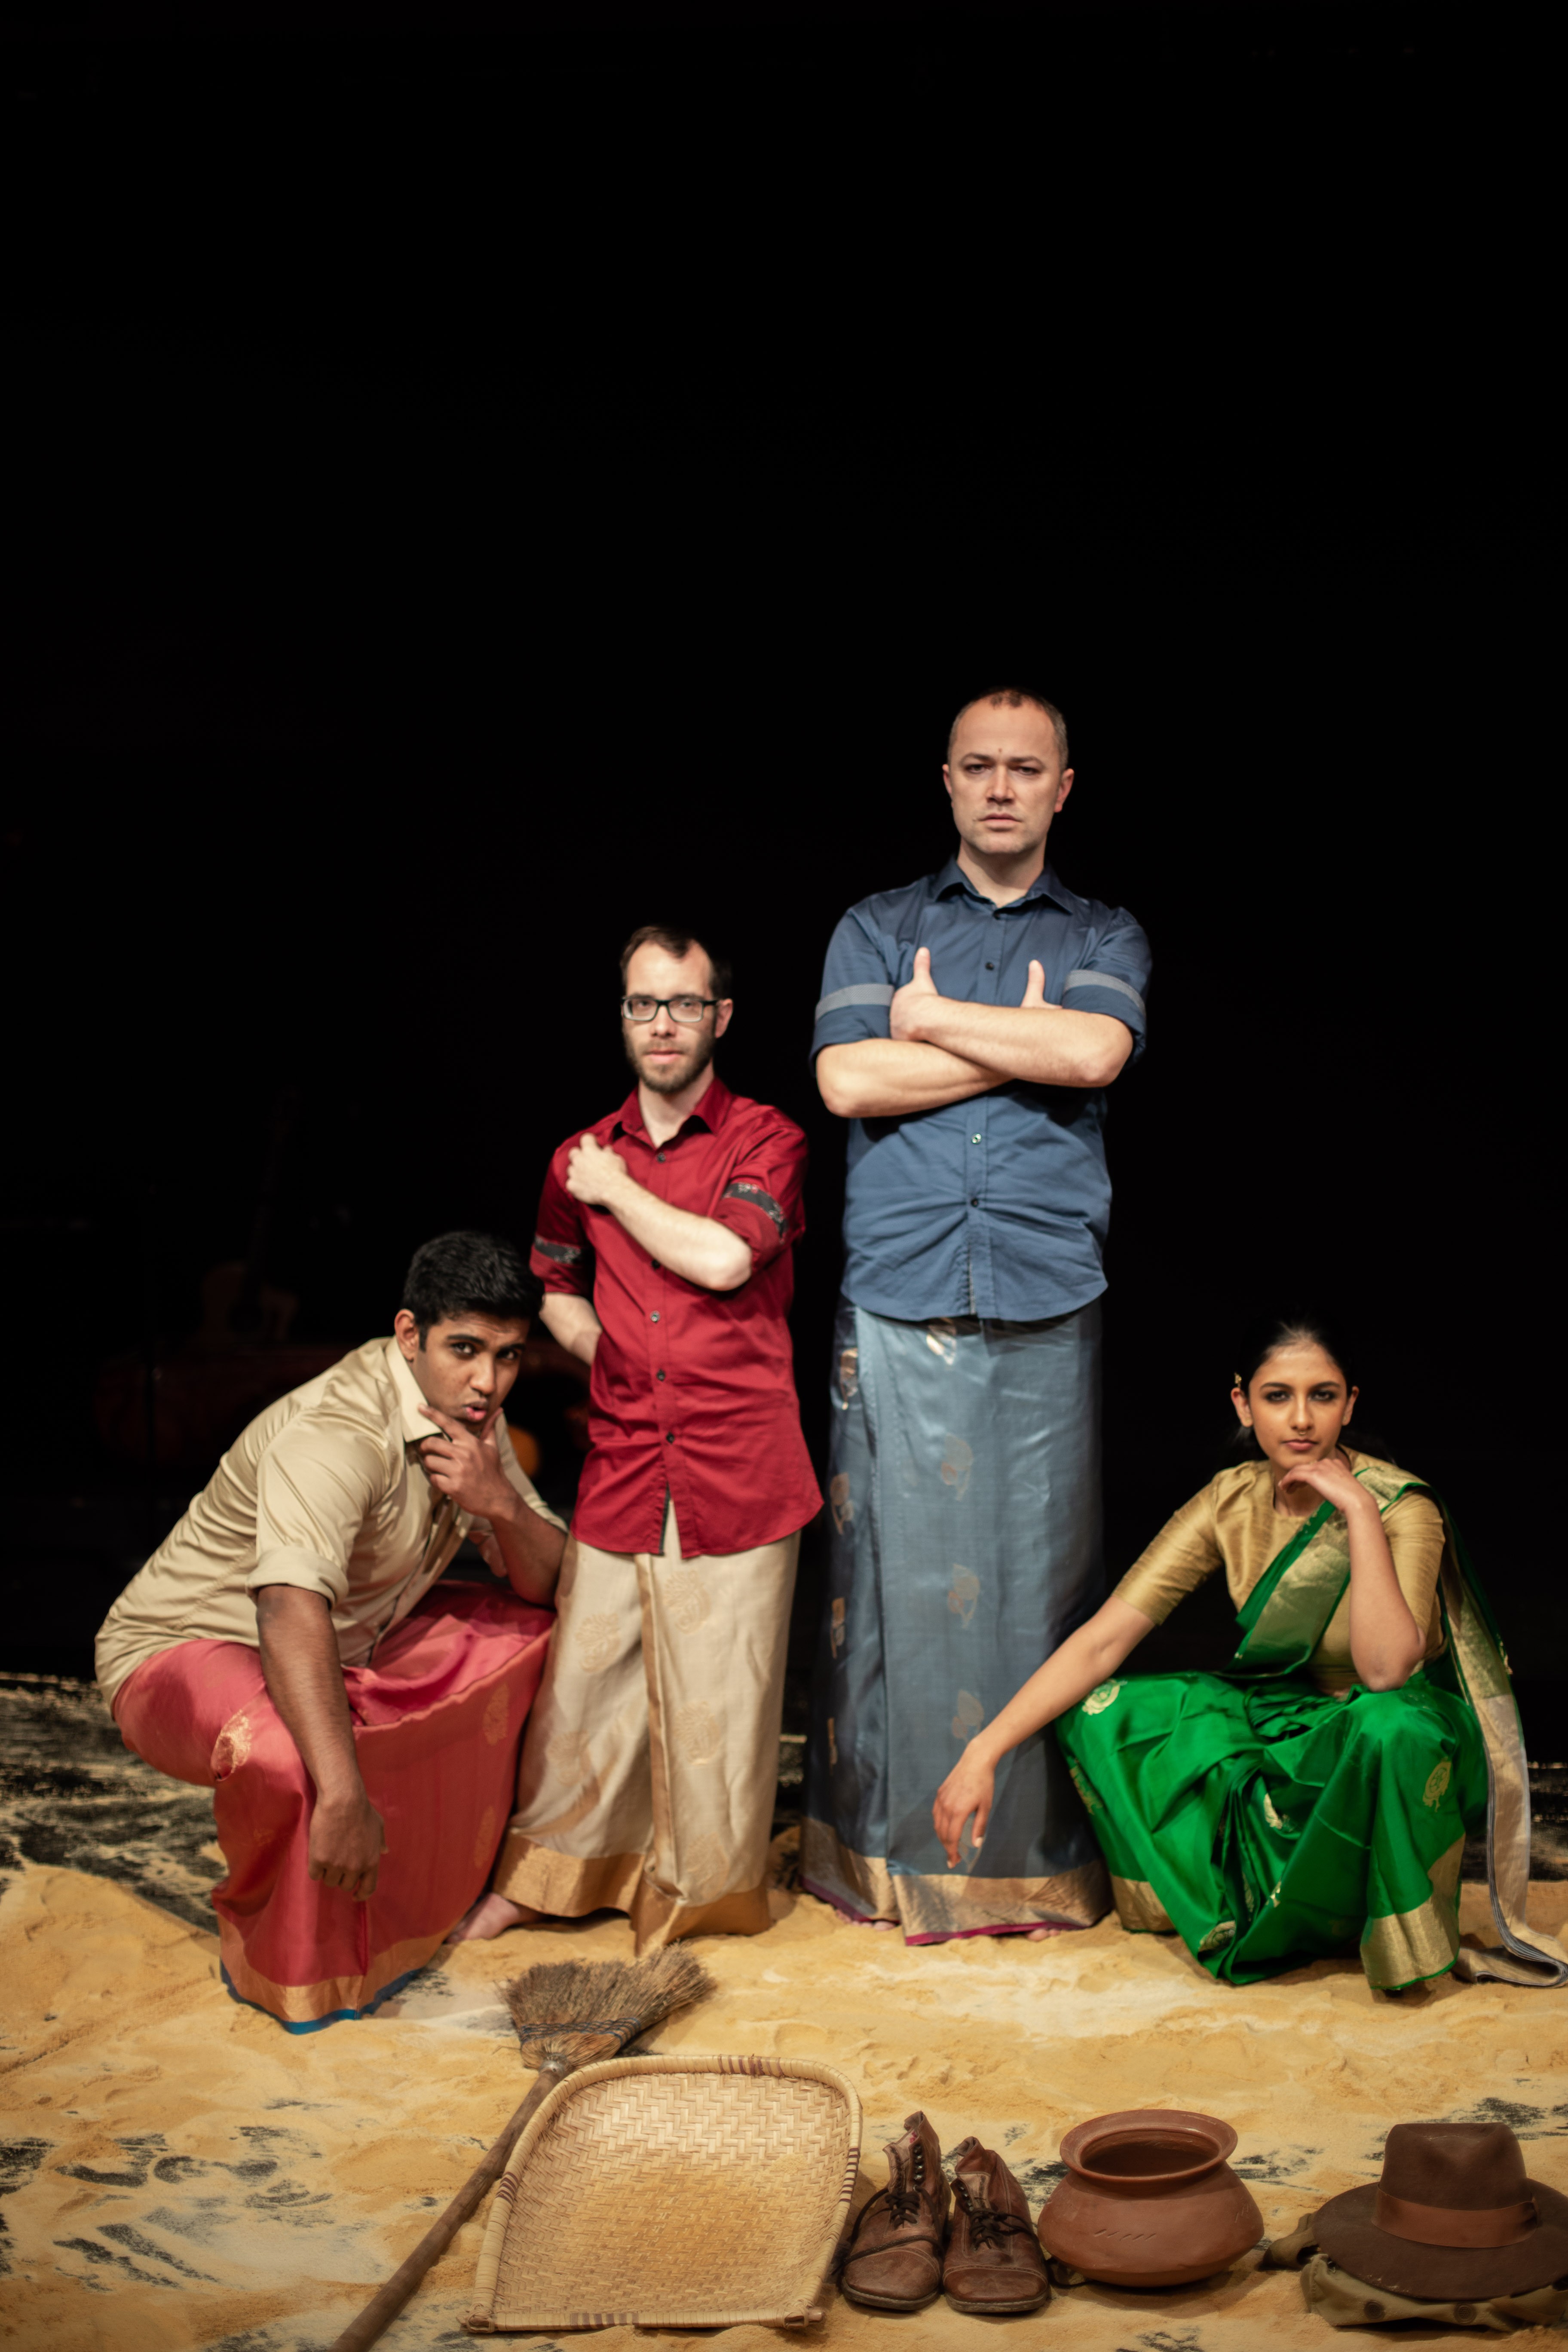 Photograph of a group of people in South Asian garments on a surface covered in sand